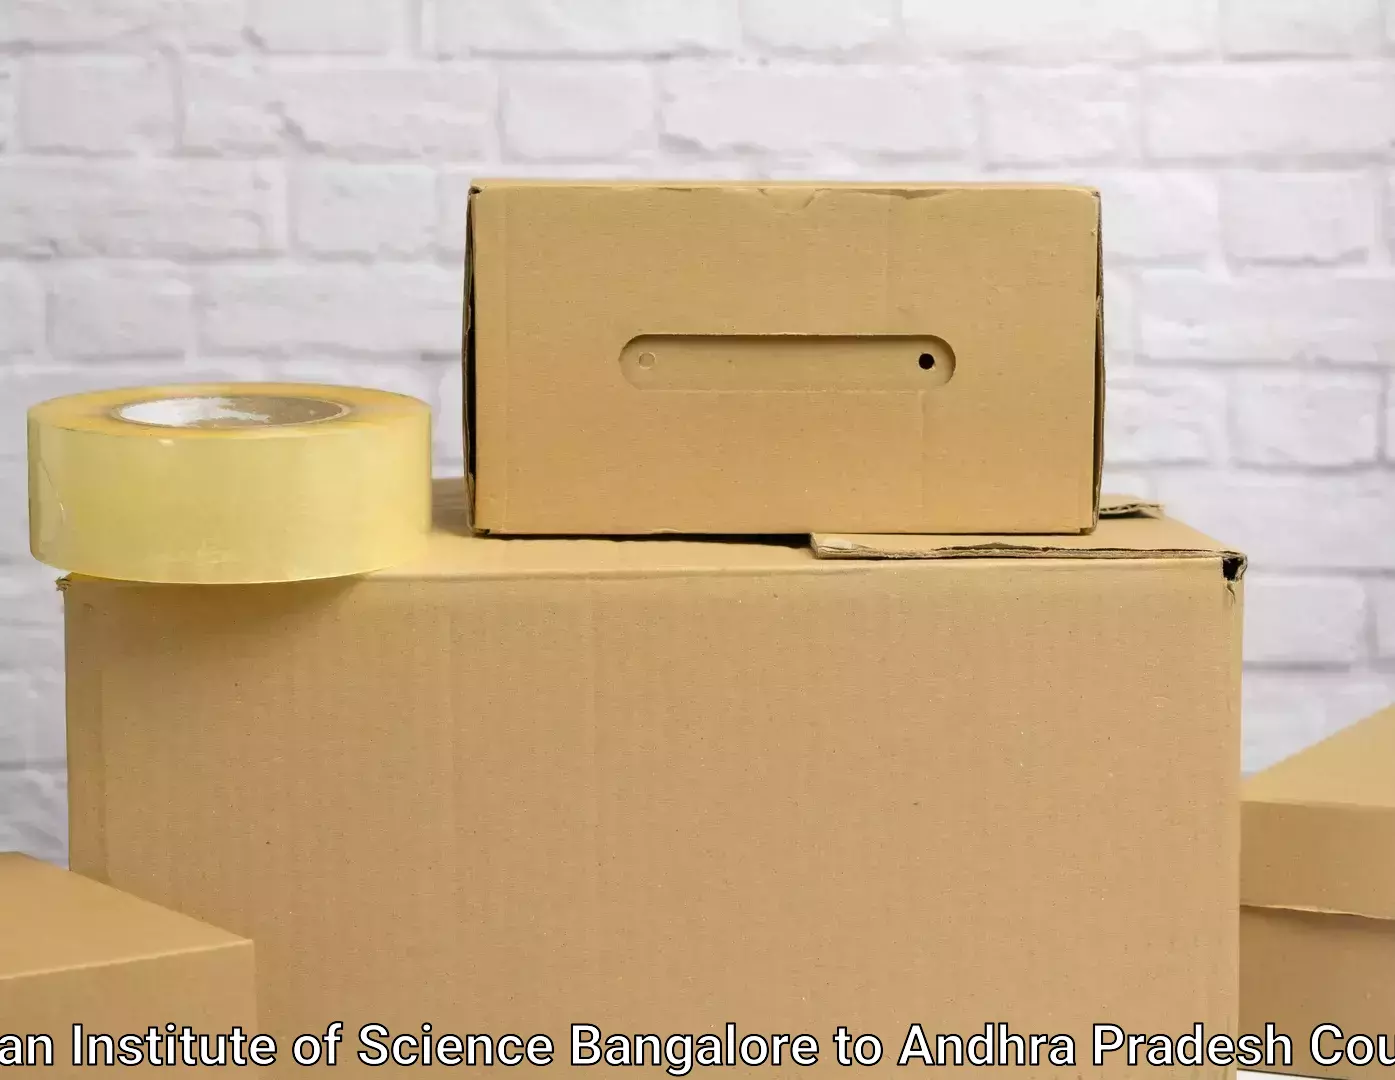 Furniture transport service in Indian Institute of Science Bangalore to Buckinghampet